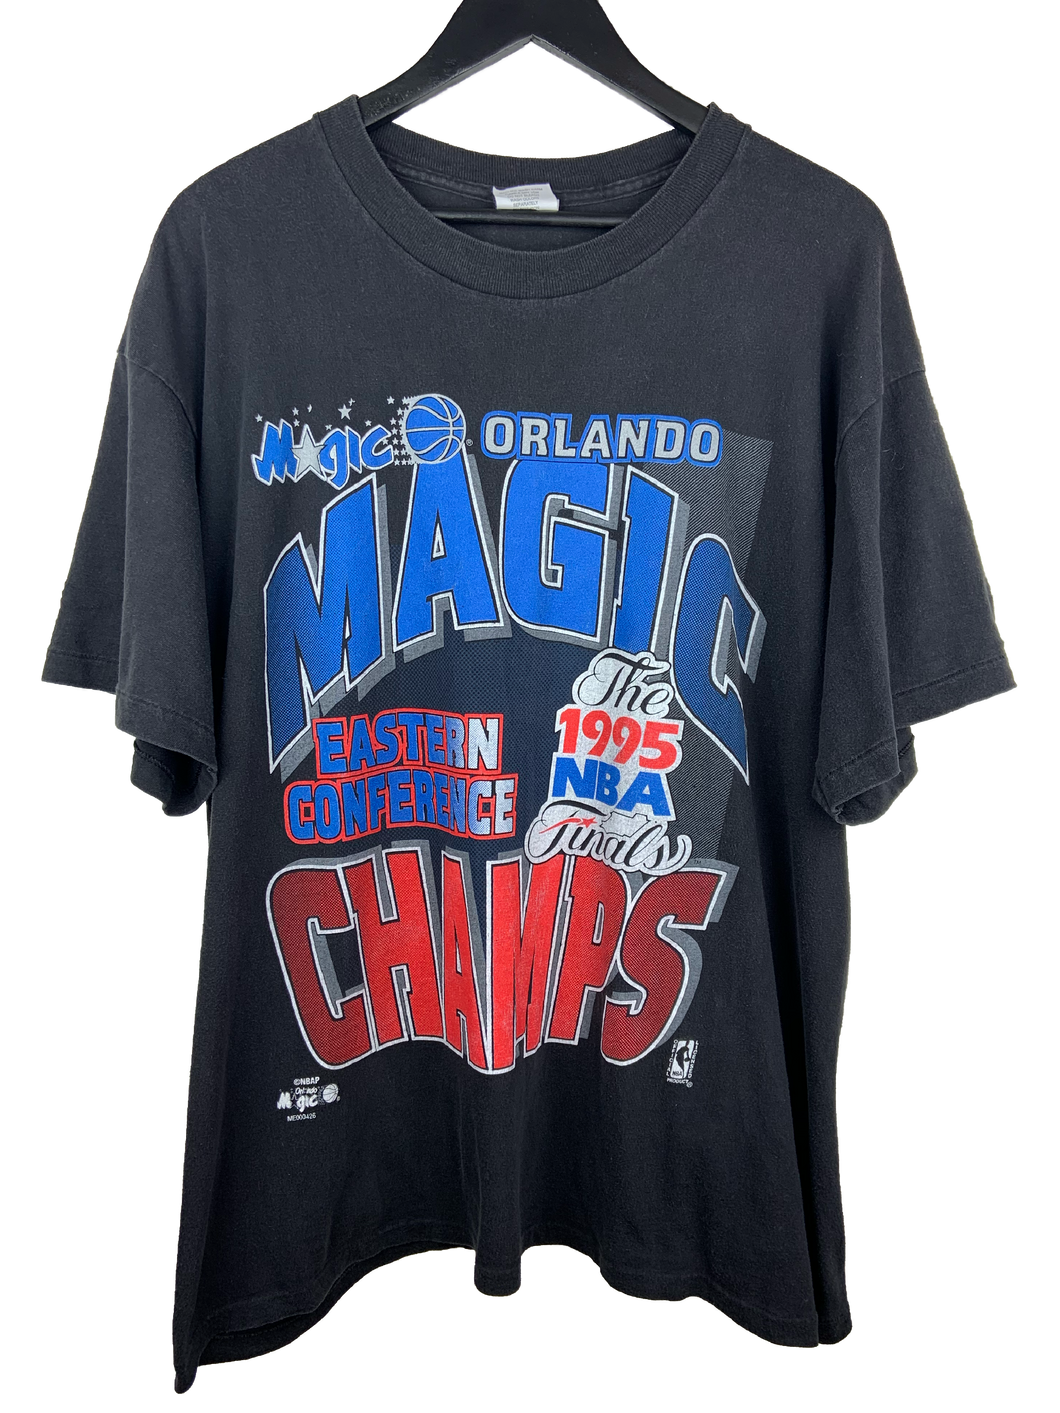 1995 ORLANDO MAGIC EASTERN CONFERENCE ‘SS’ TEE - LARGE